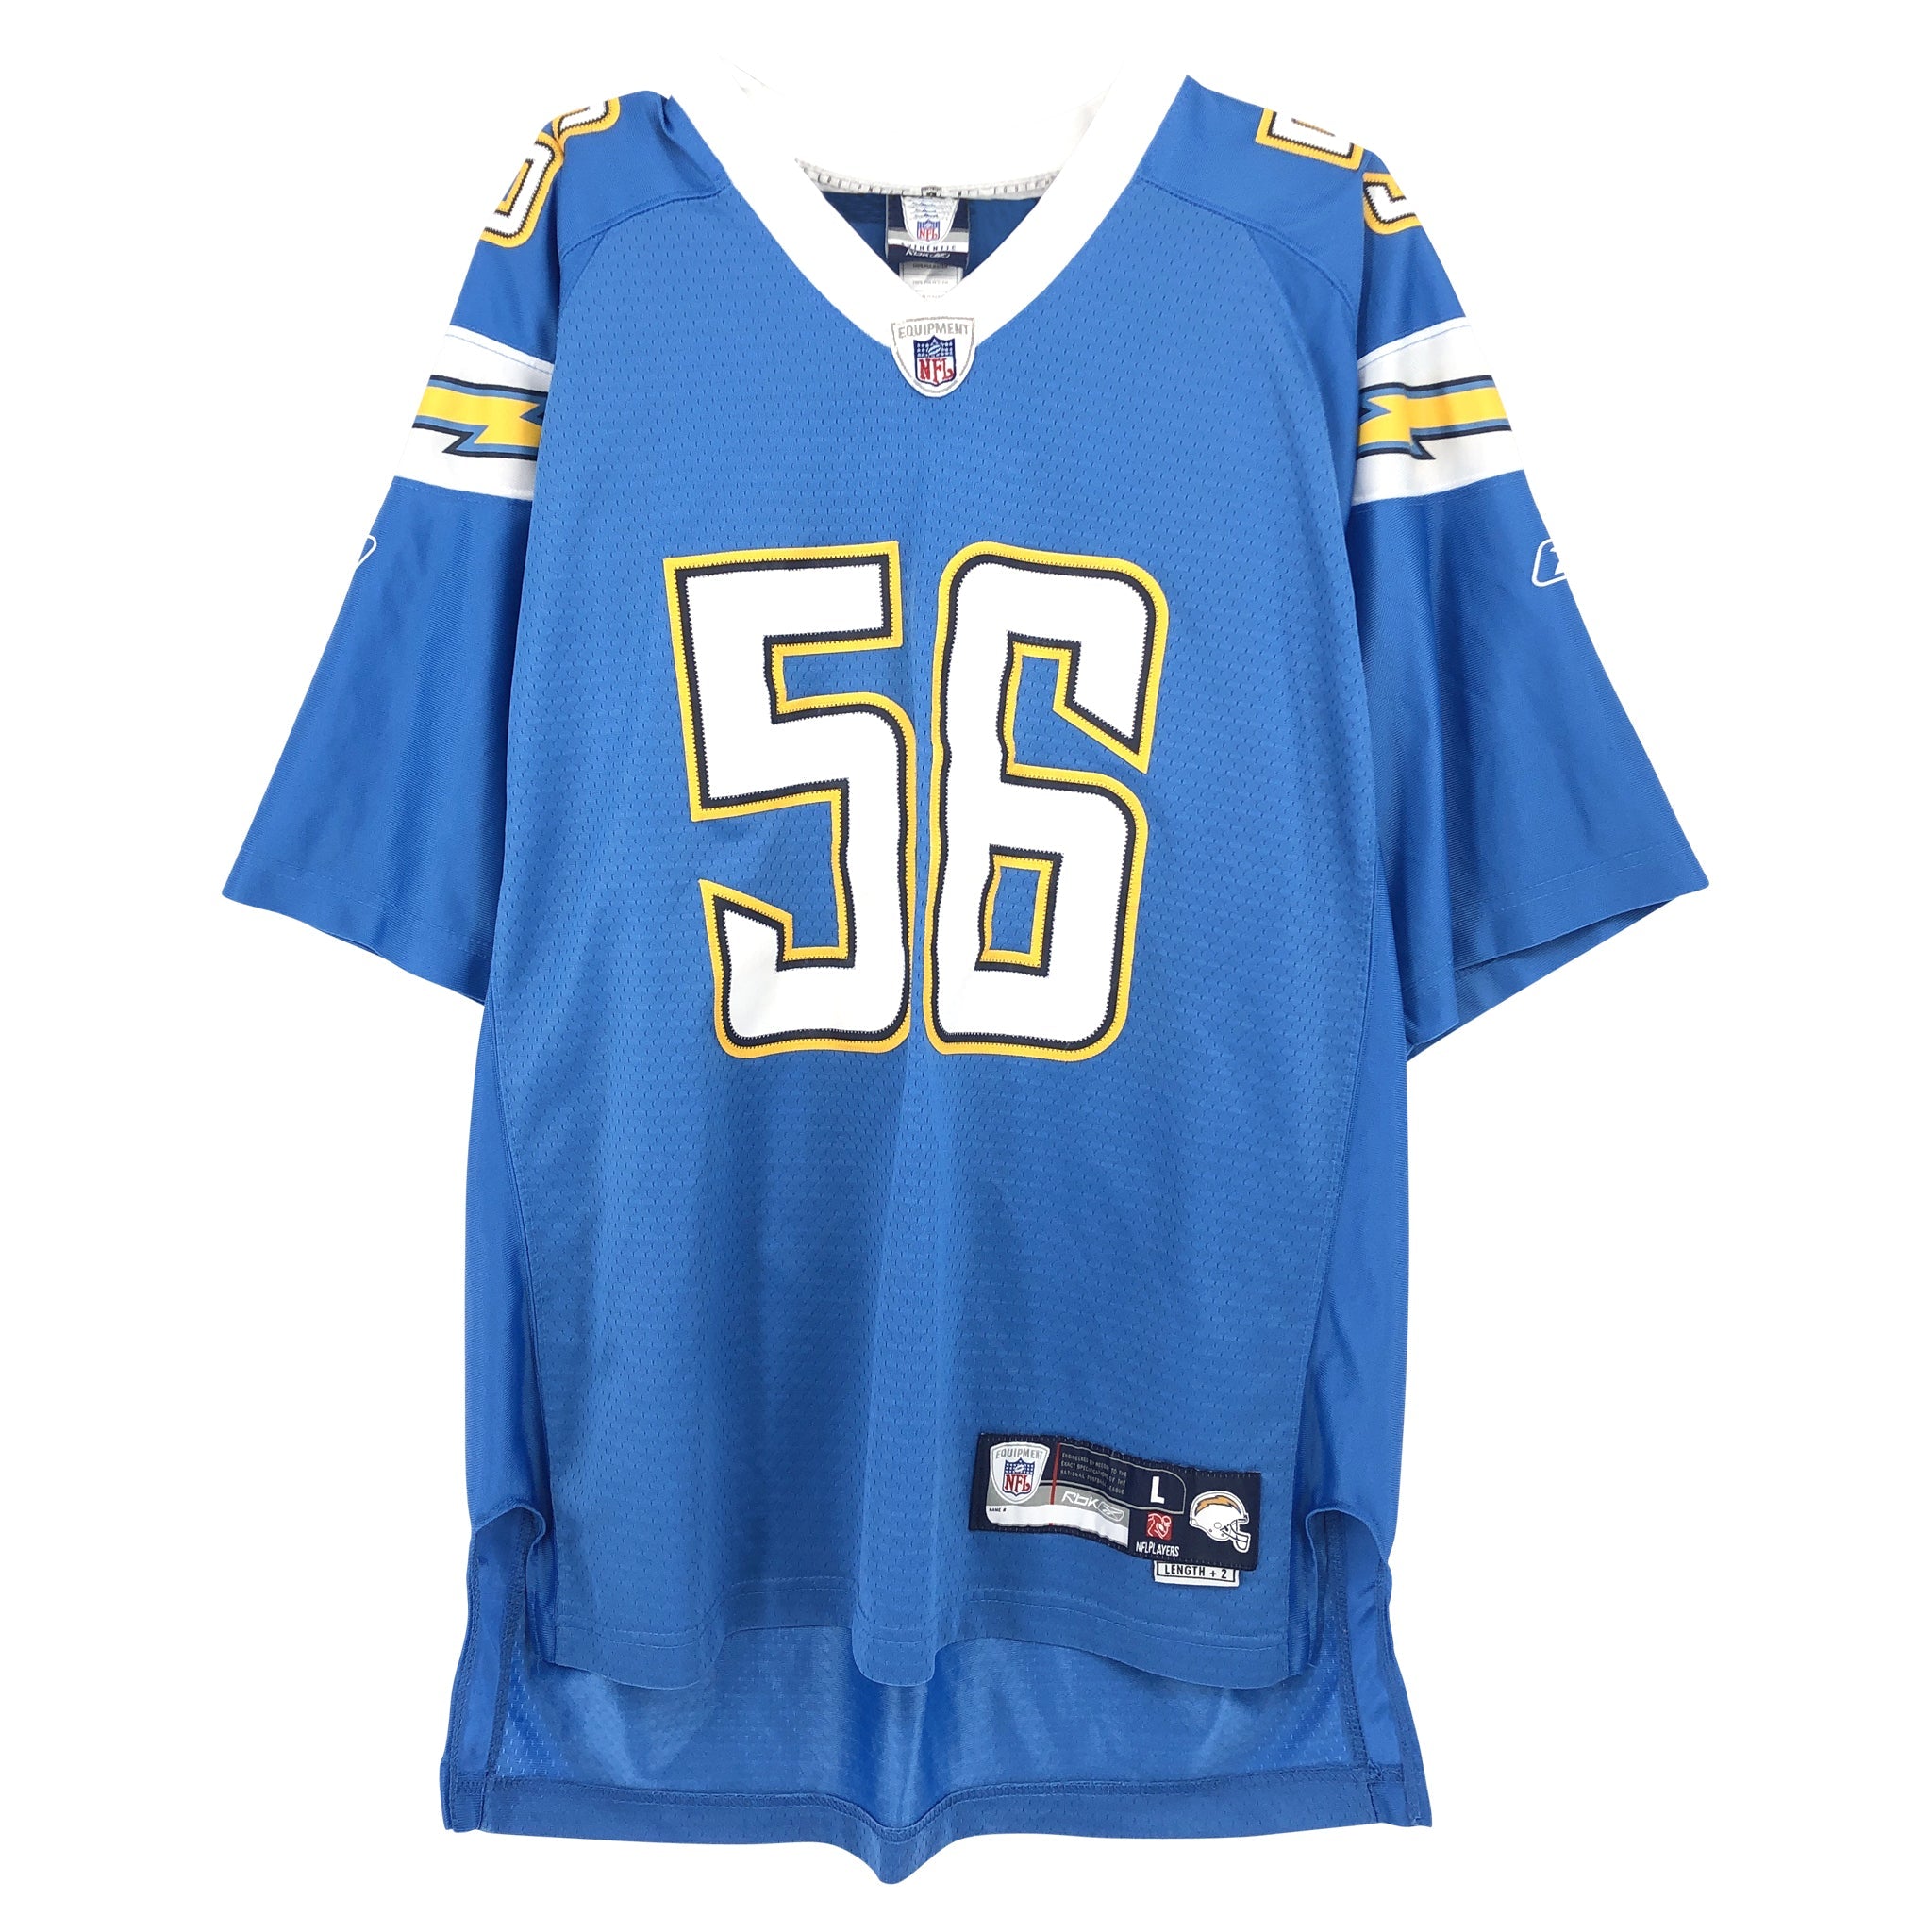 NFL: LOS ANGELES CHARGERS JERSEY T-SHIRT